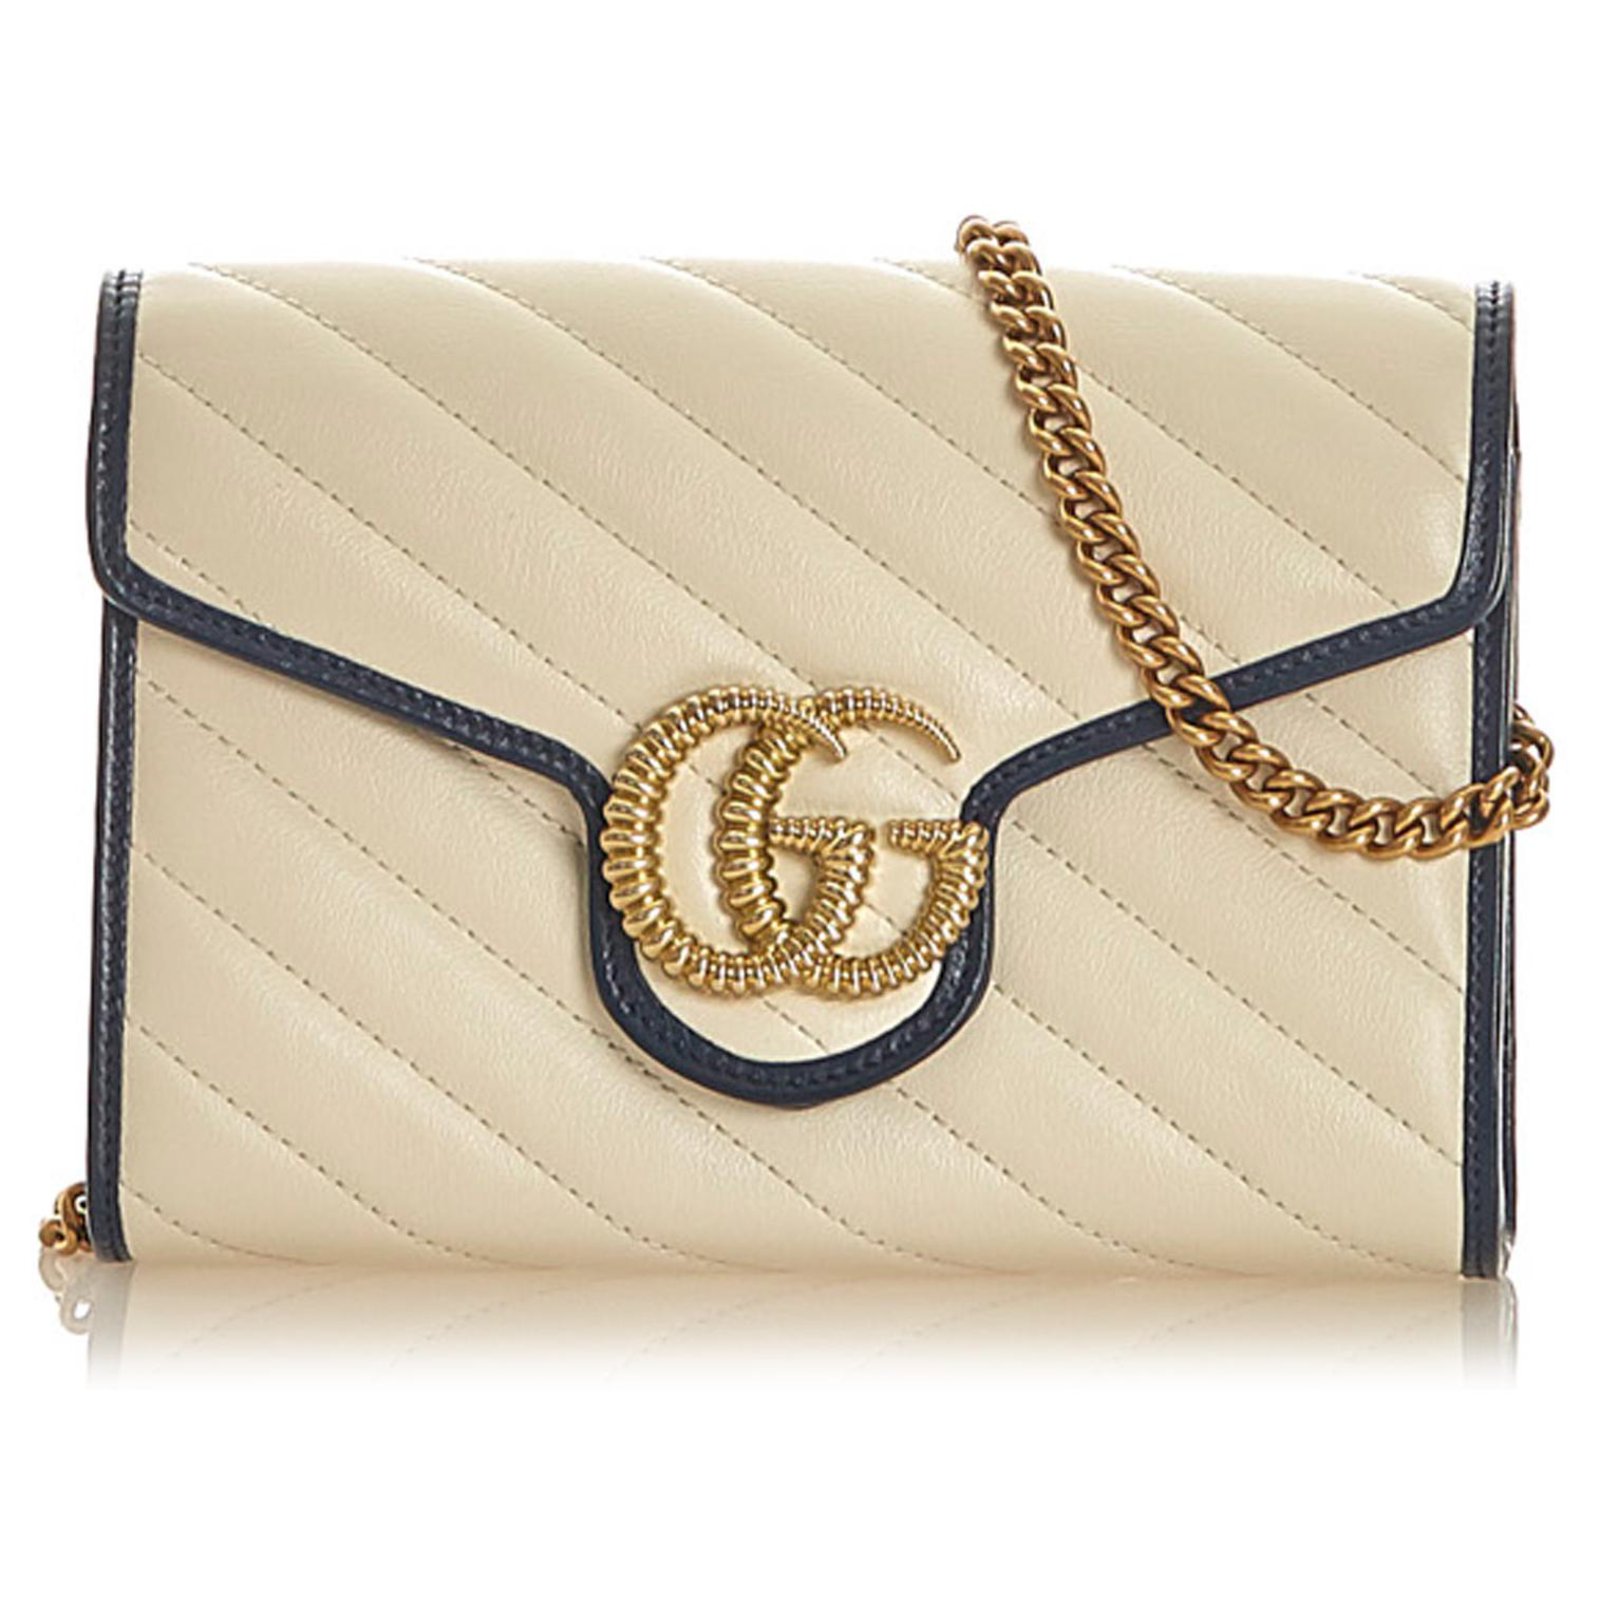 Gucci Marmont Wallet on Chain - Bijoux Bag Spa & Consignment